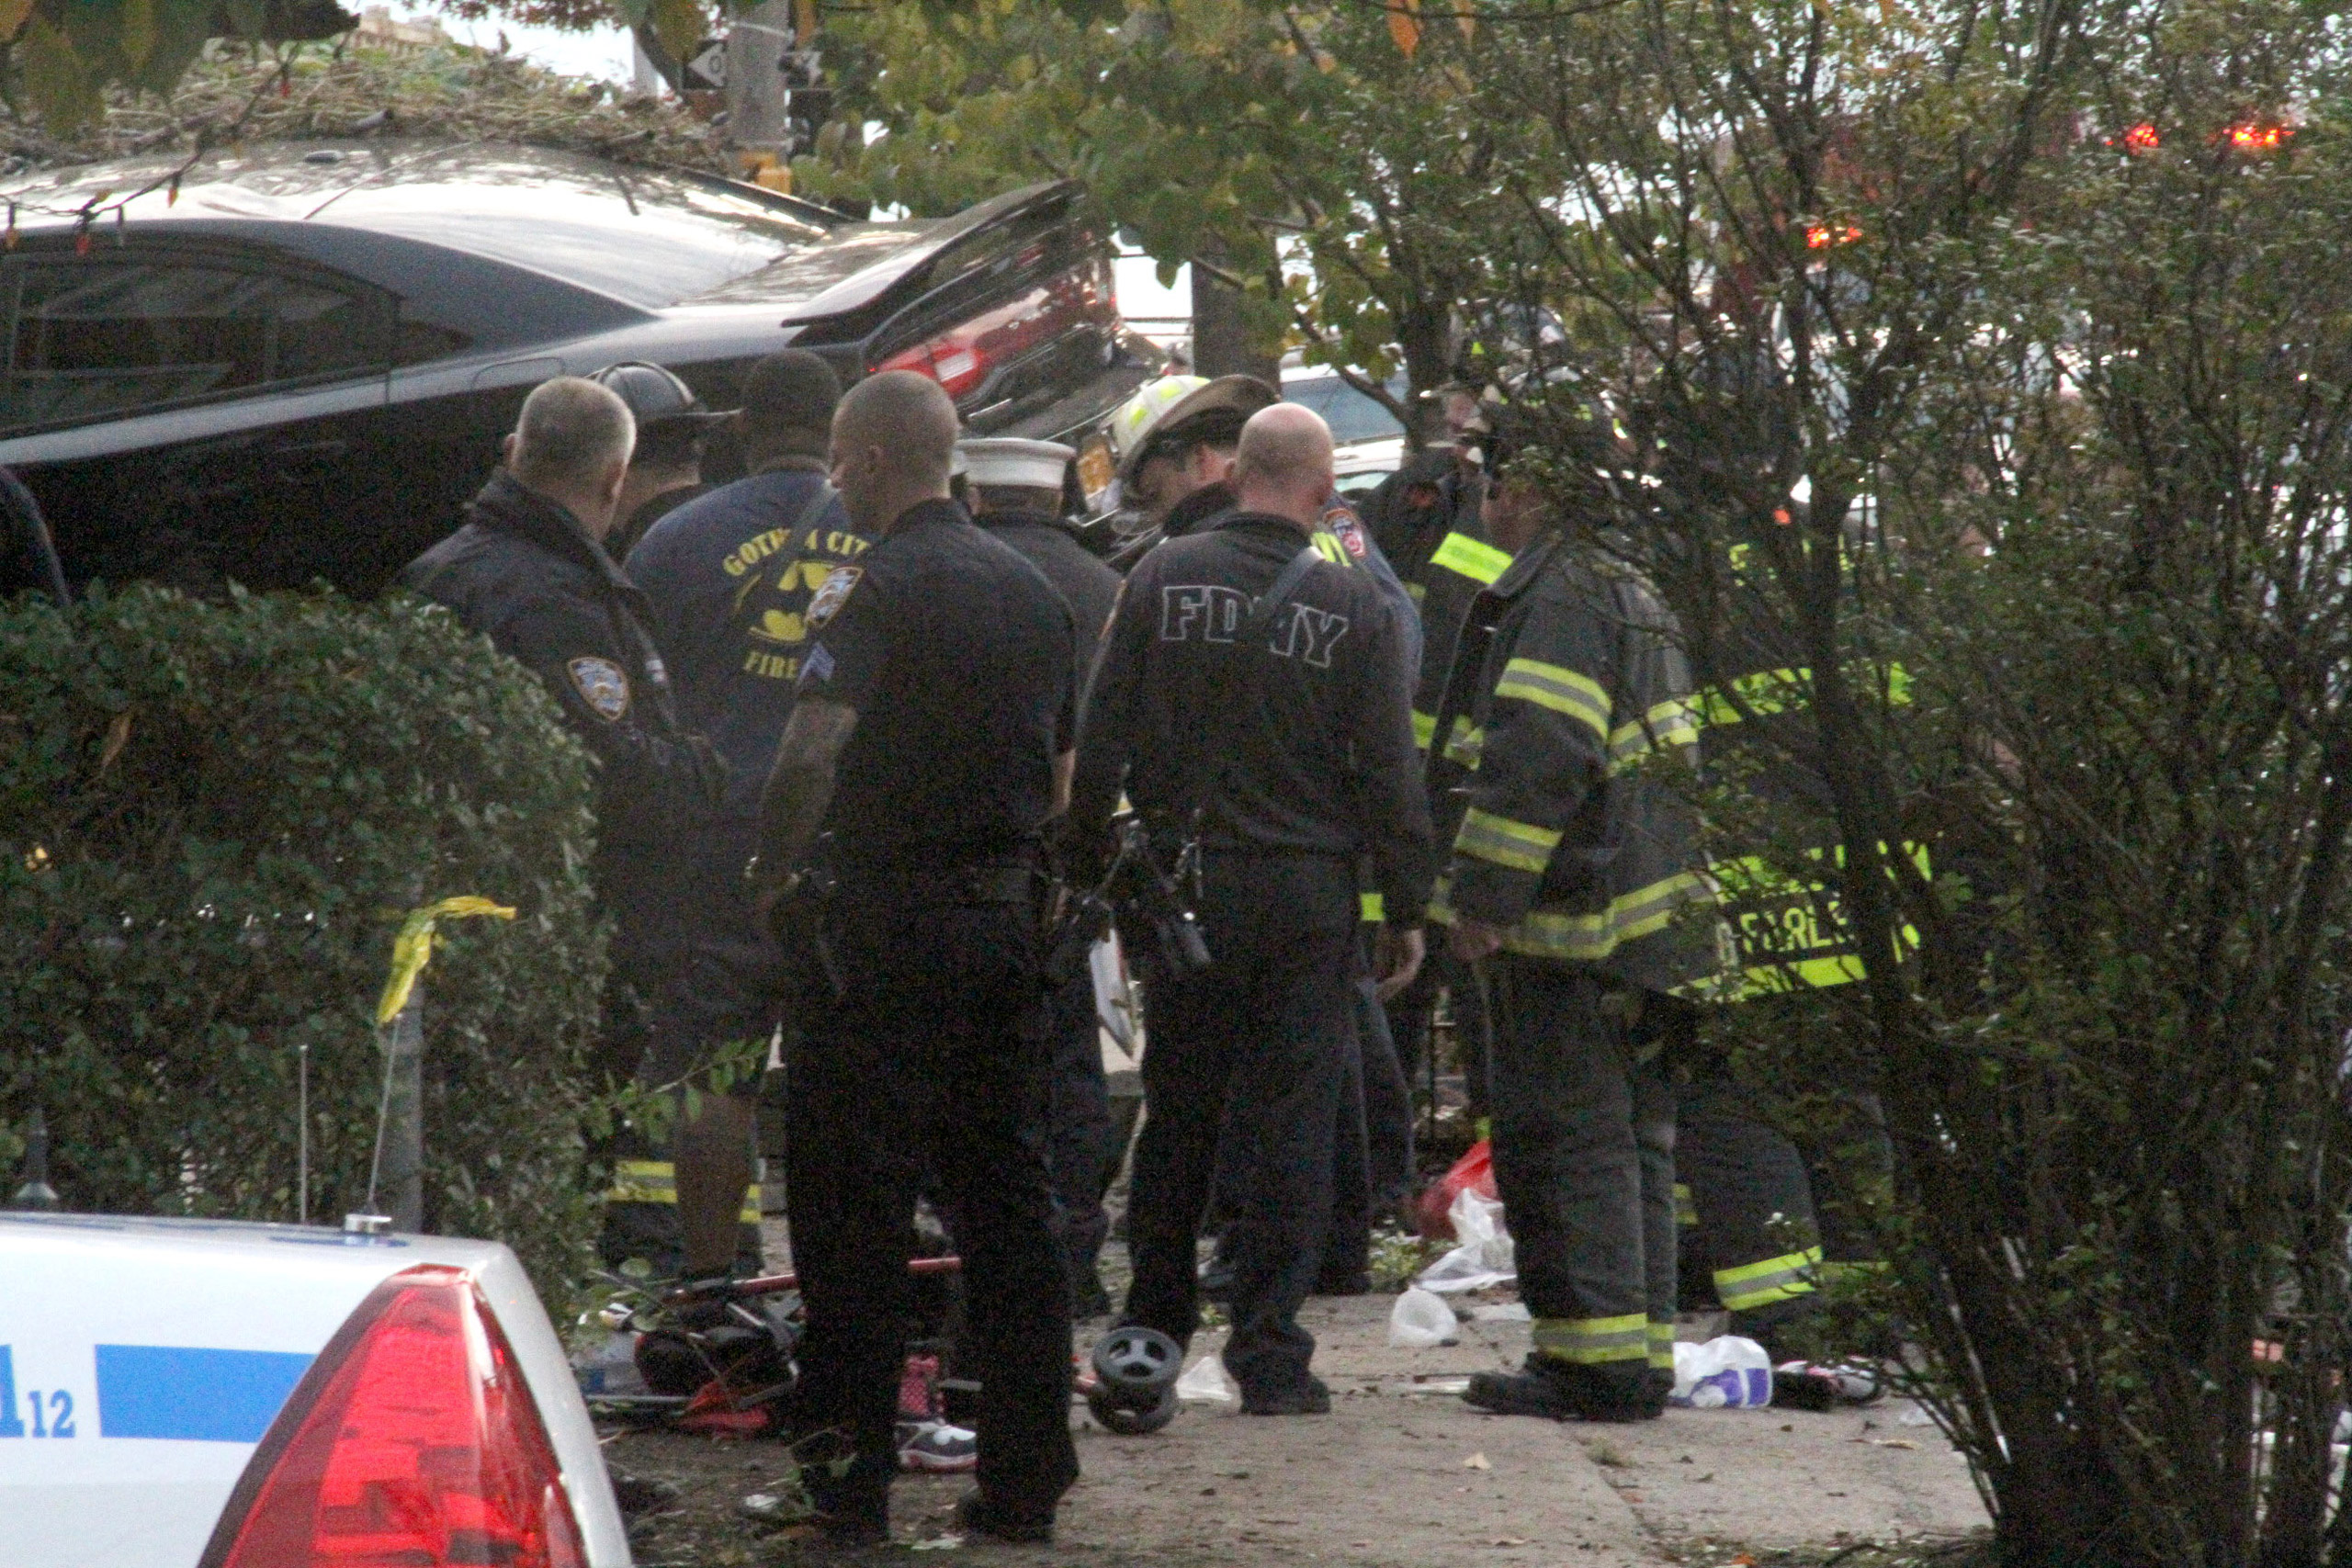 First responders examine an automobile after its driver lost control and plowed into a group of trick-or-treaters, killing three people and injuring several, in the Bronx, N.Y., on Oct. 31, 2015. (David Greene—AP)